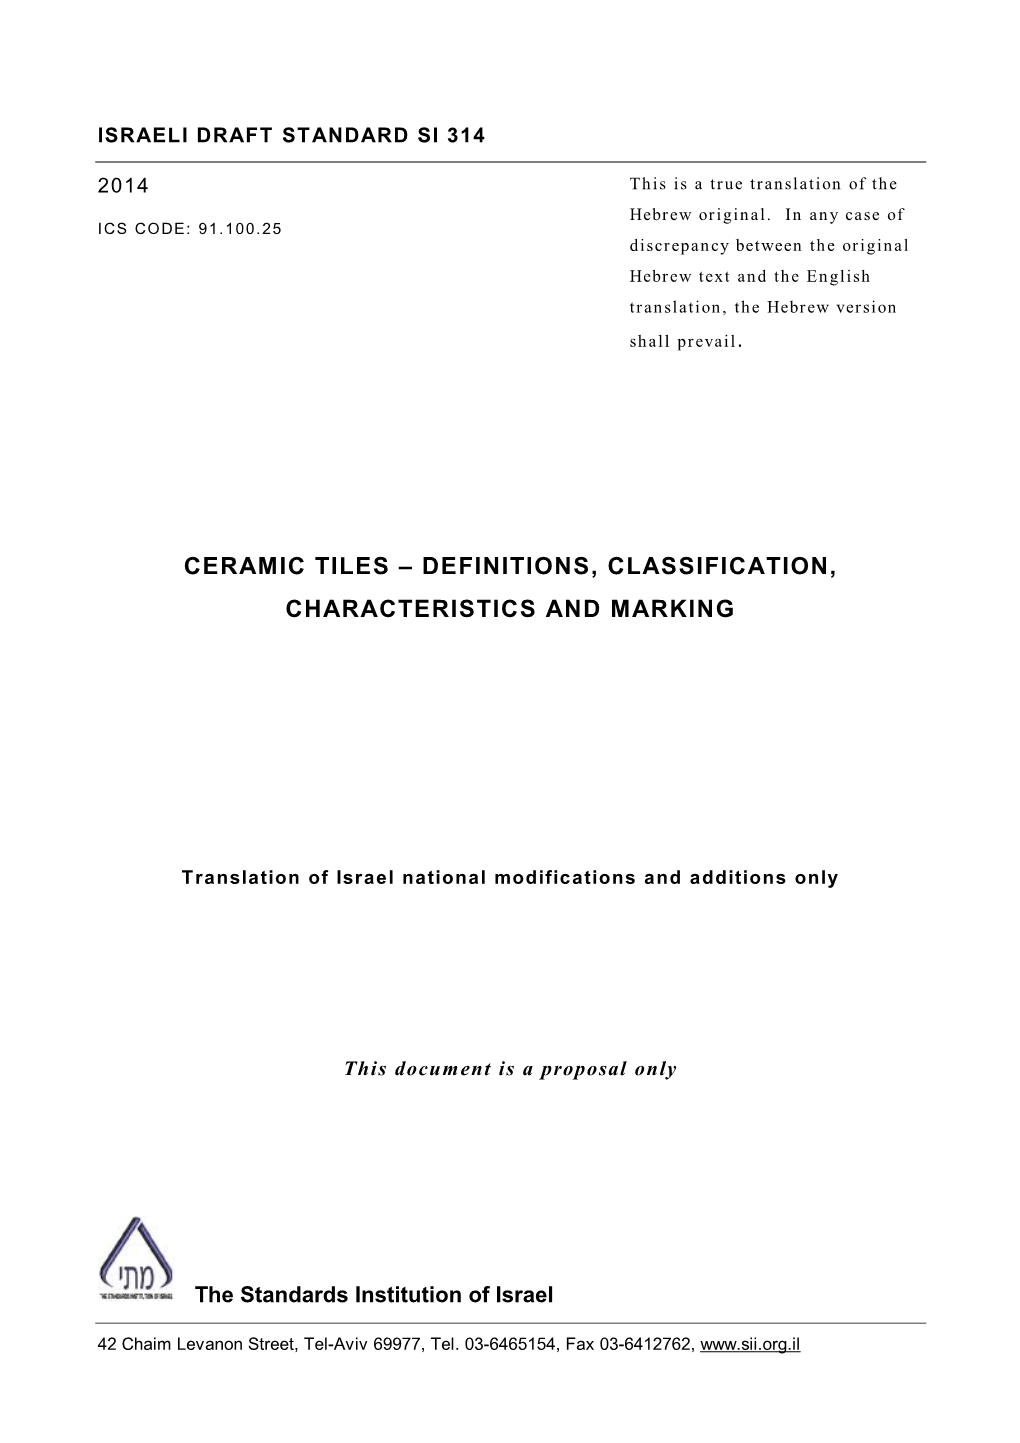 Ceramic Tiles – Definitions, Classification, Characteristics and Marking